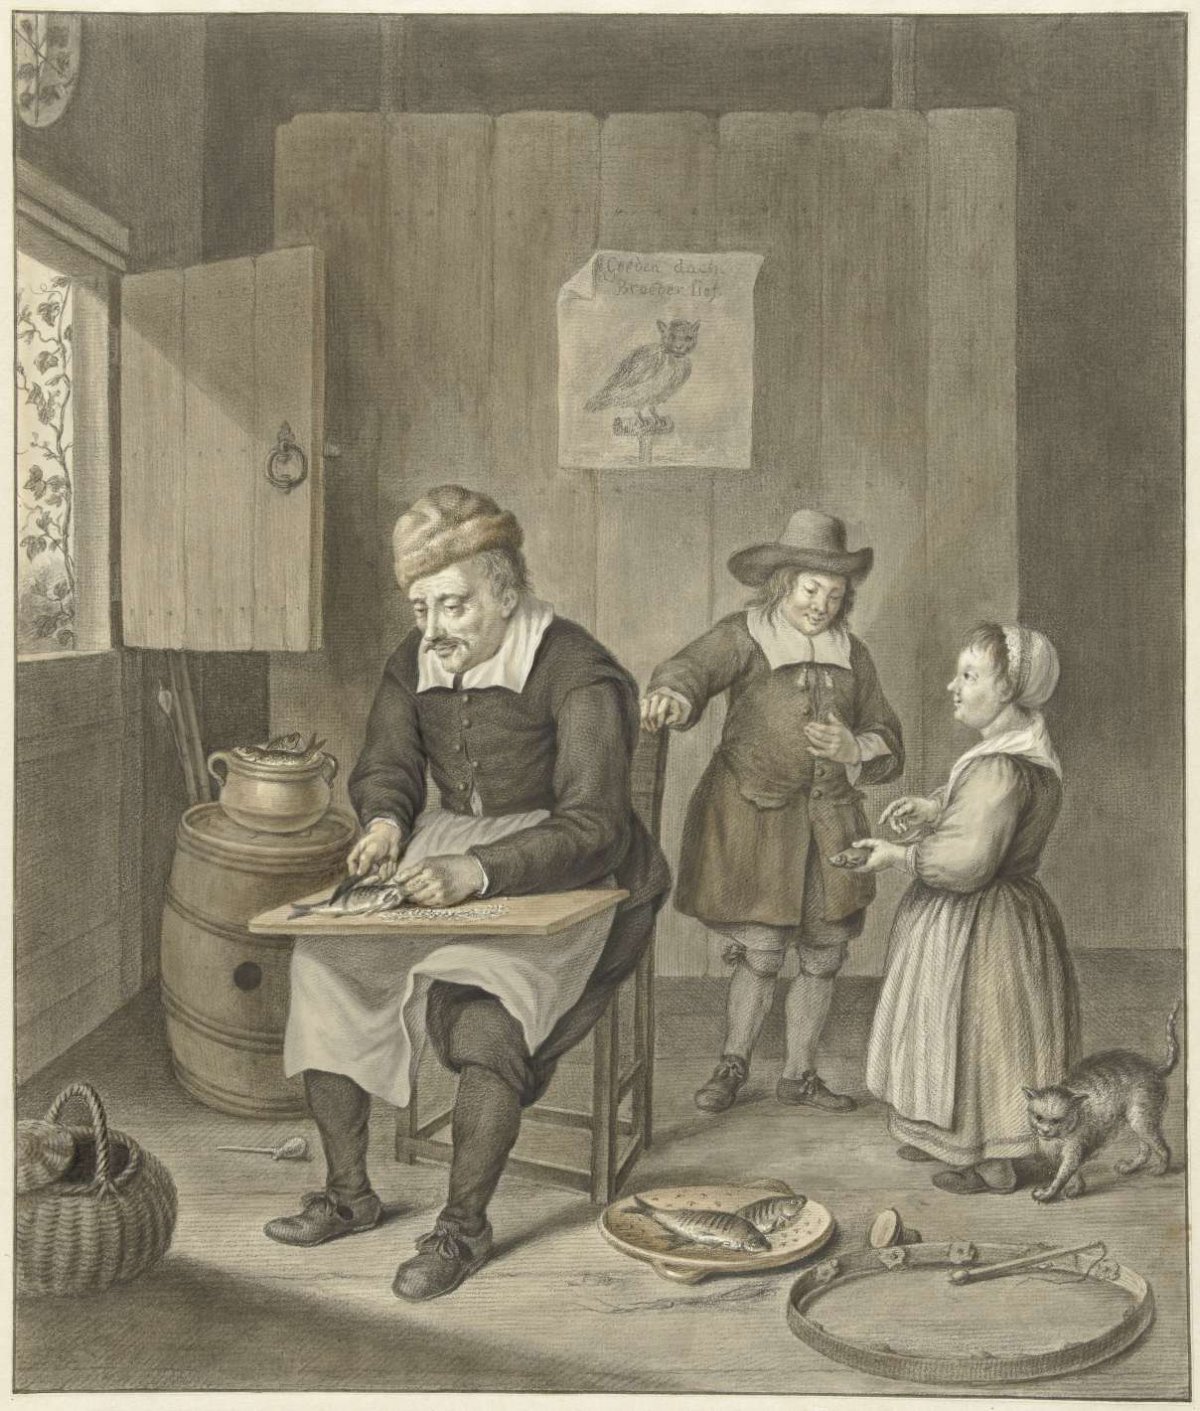 Interior with man cleaning fish and two children, Abraham Delfos, 1741 - 1820